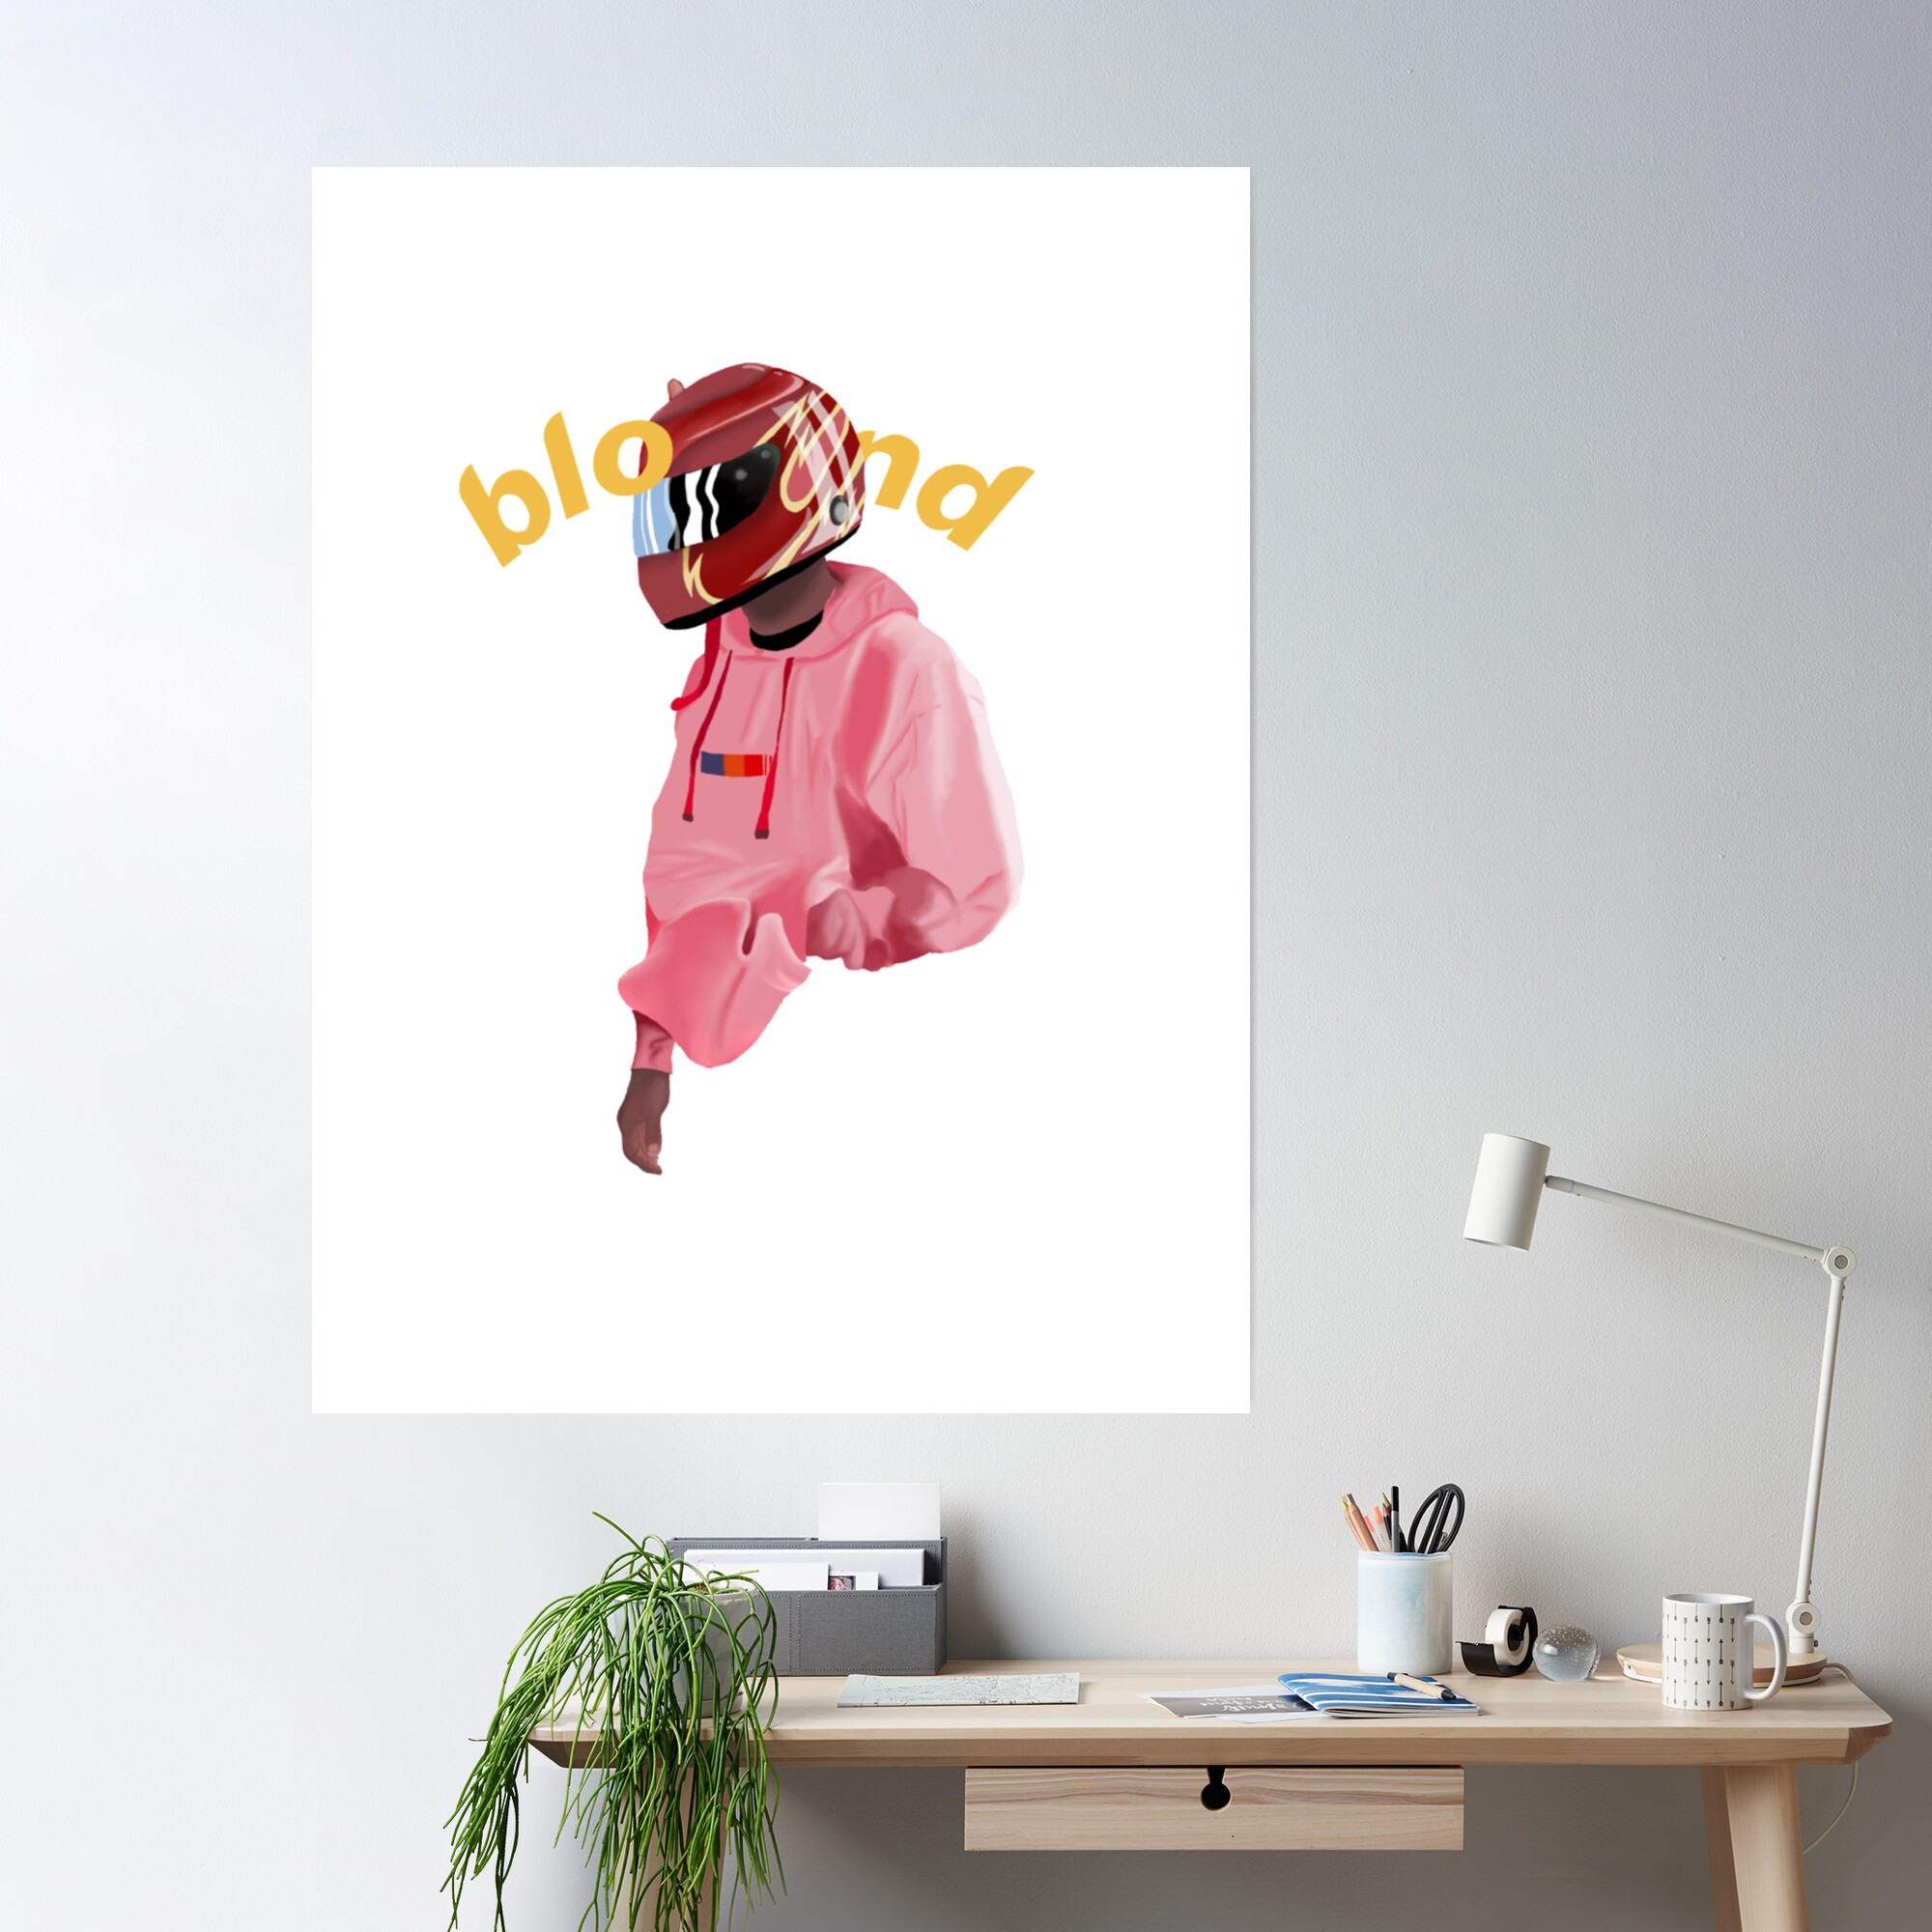 cposterlargesquare product2000x2000 7 - Frank Ocean Merch